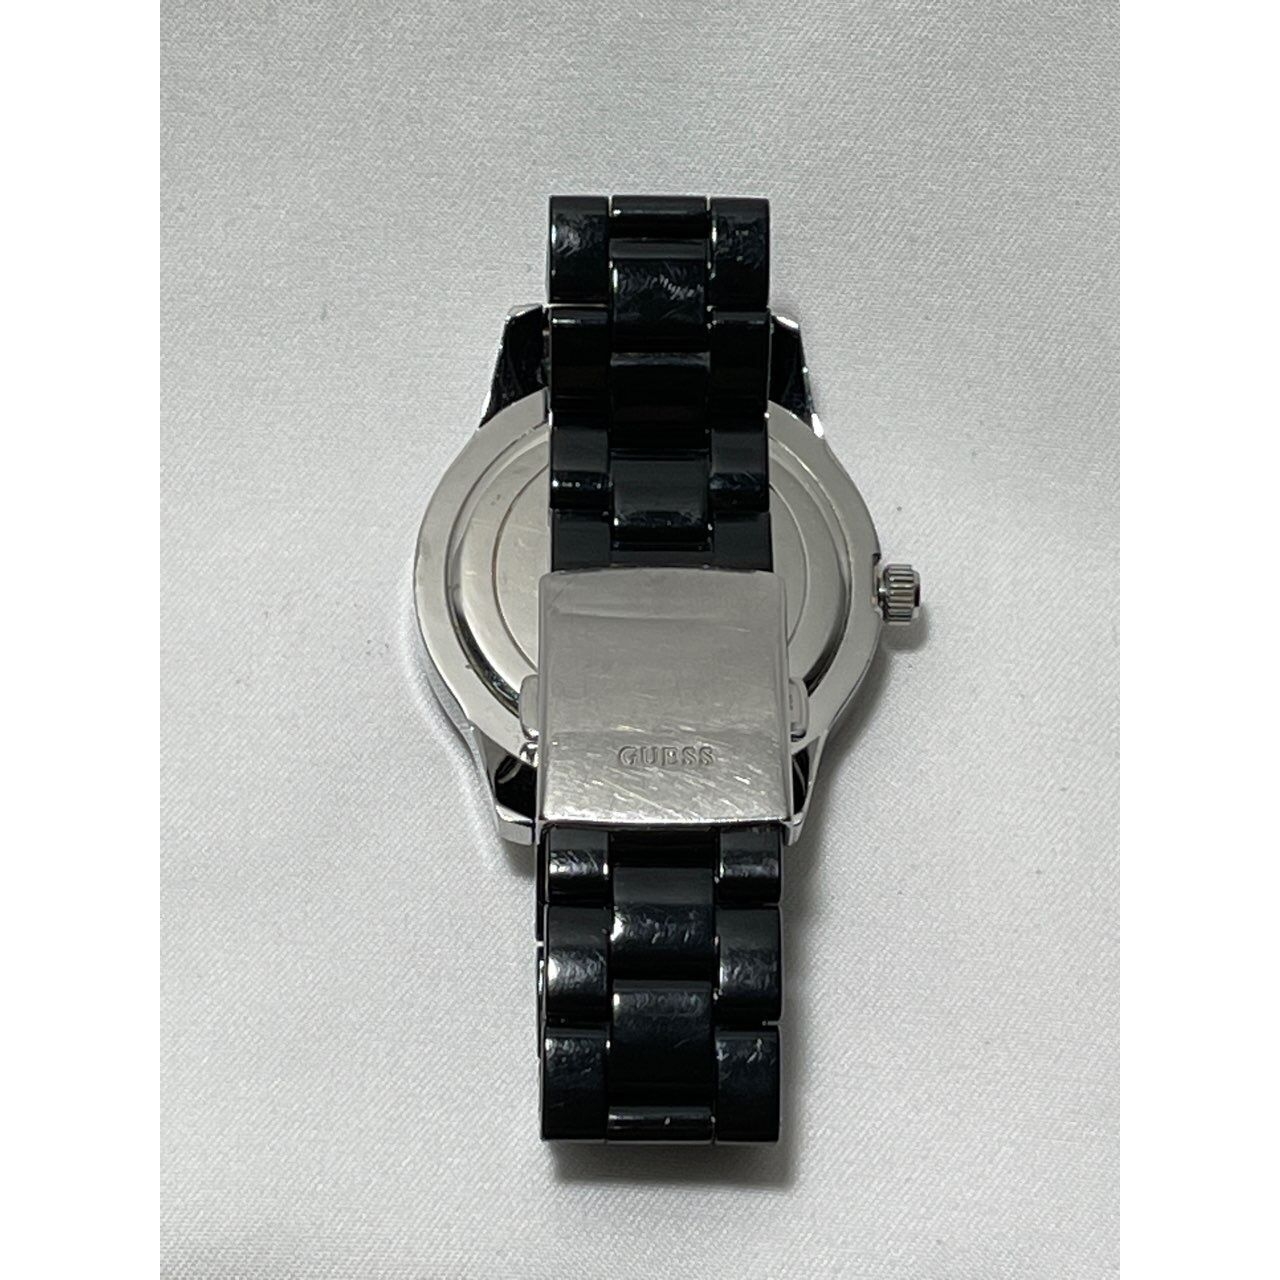 Guess Silver & Black Watch